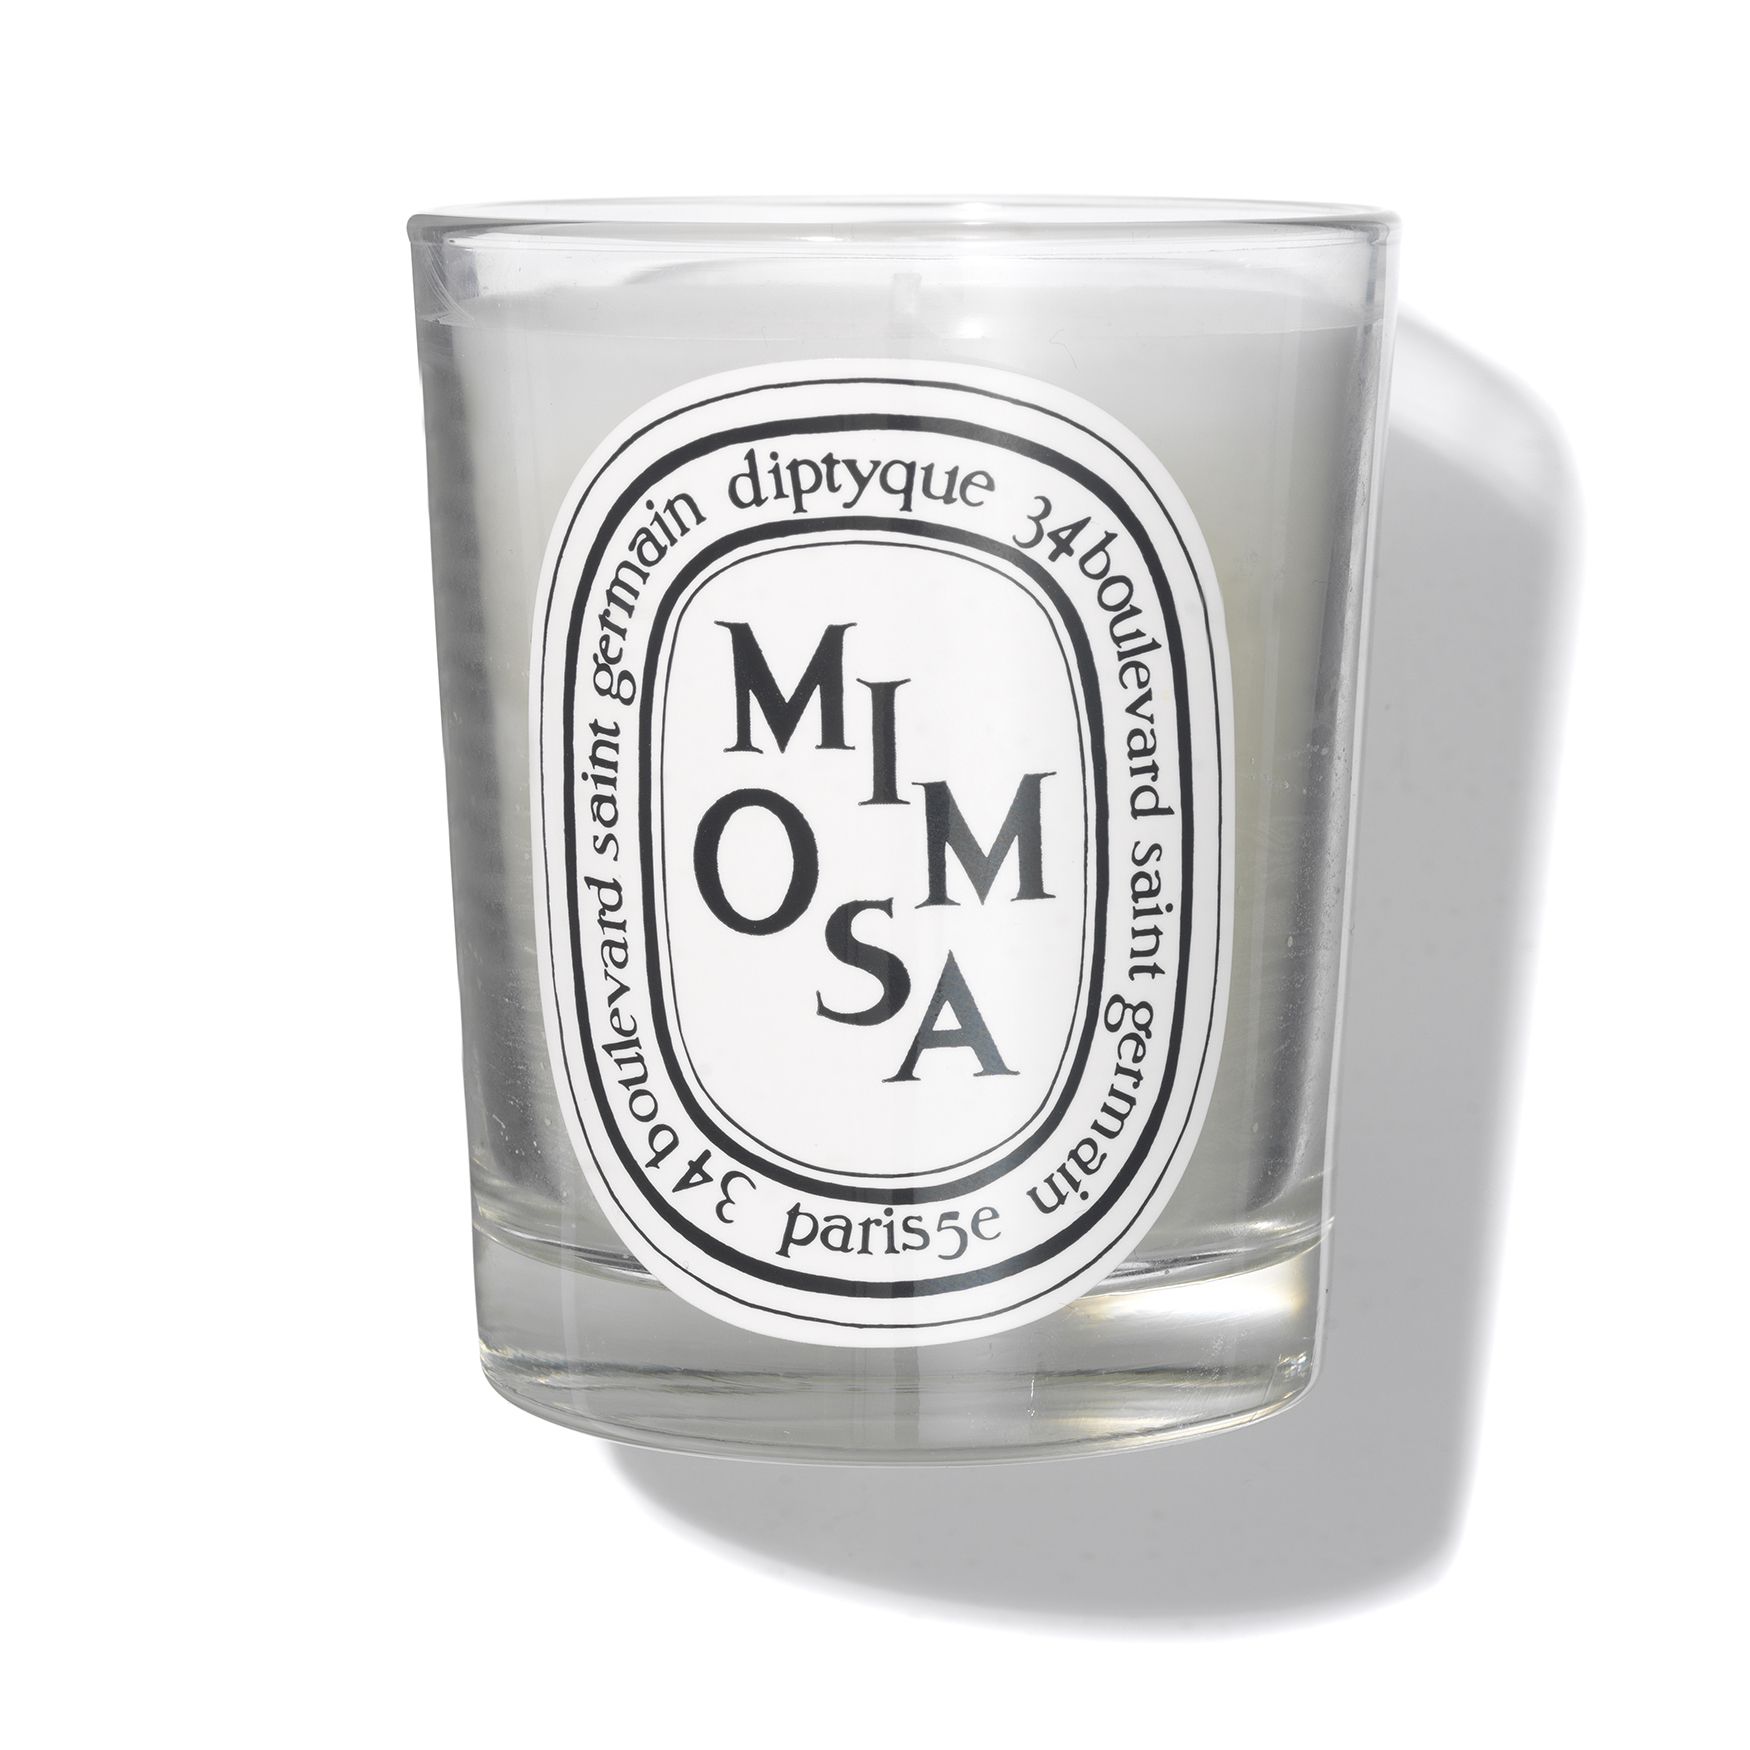 Diptyque Mimosa Scented Candle 190g | Space NK (US)